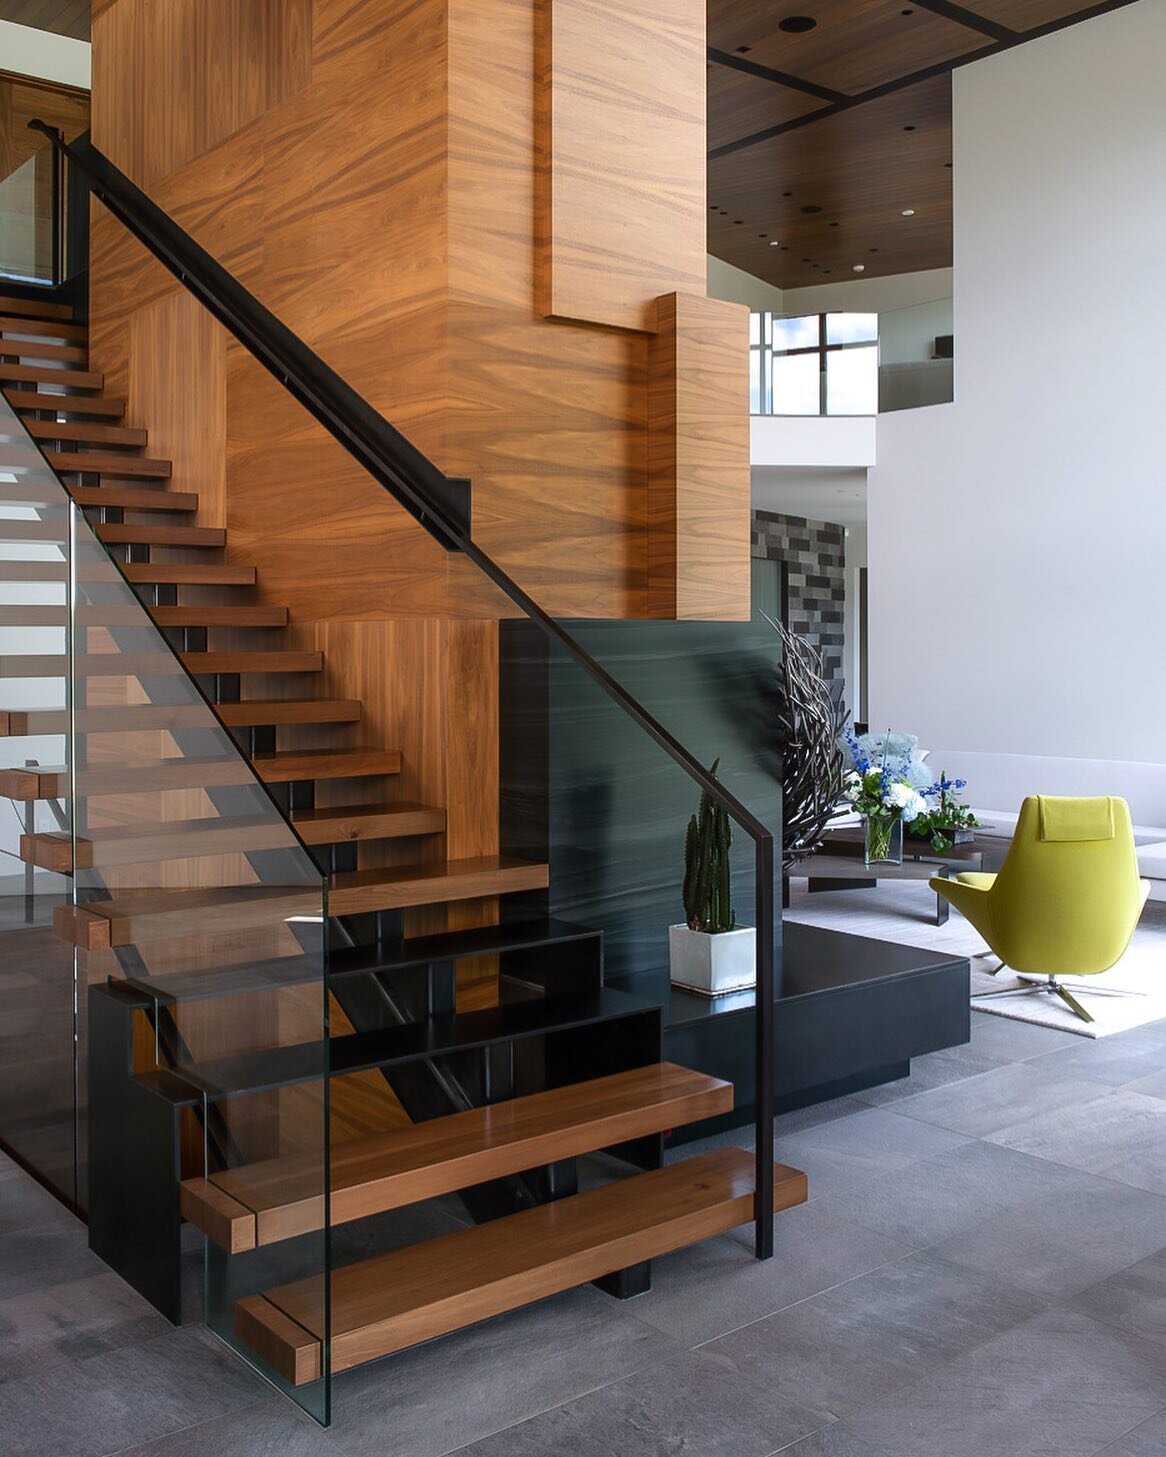 Because I&rsquo;m a sucker for stairs and room reveals. This home was amazing and I thoroughly enjoyed photographing it. *Images may not be shared by third parties without home owners permission